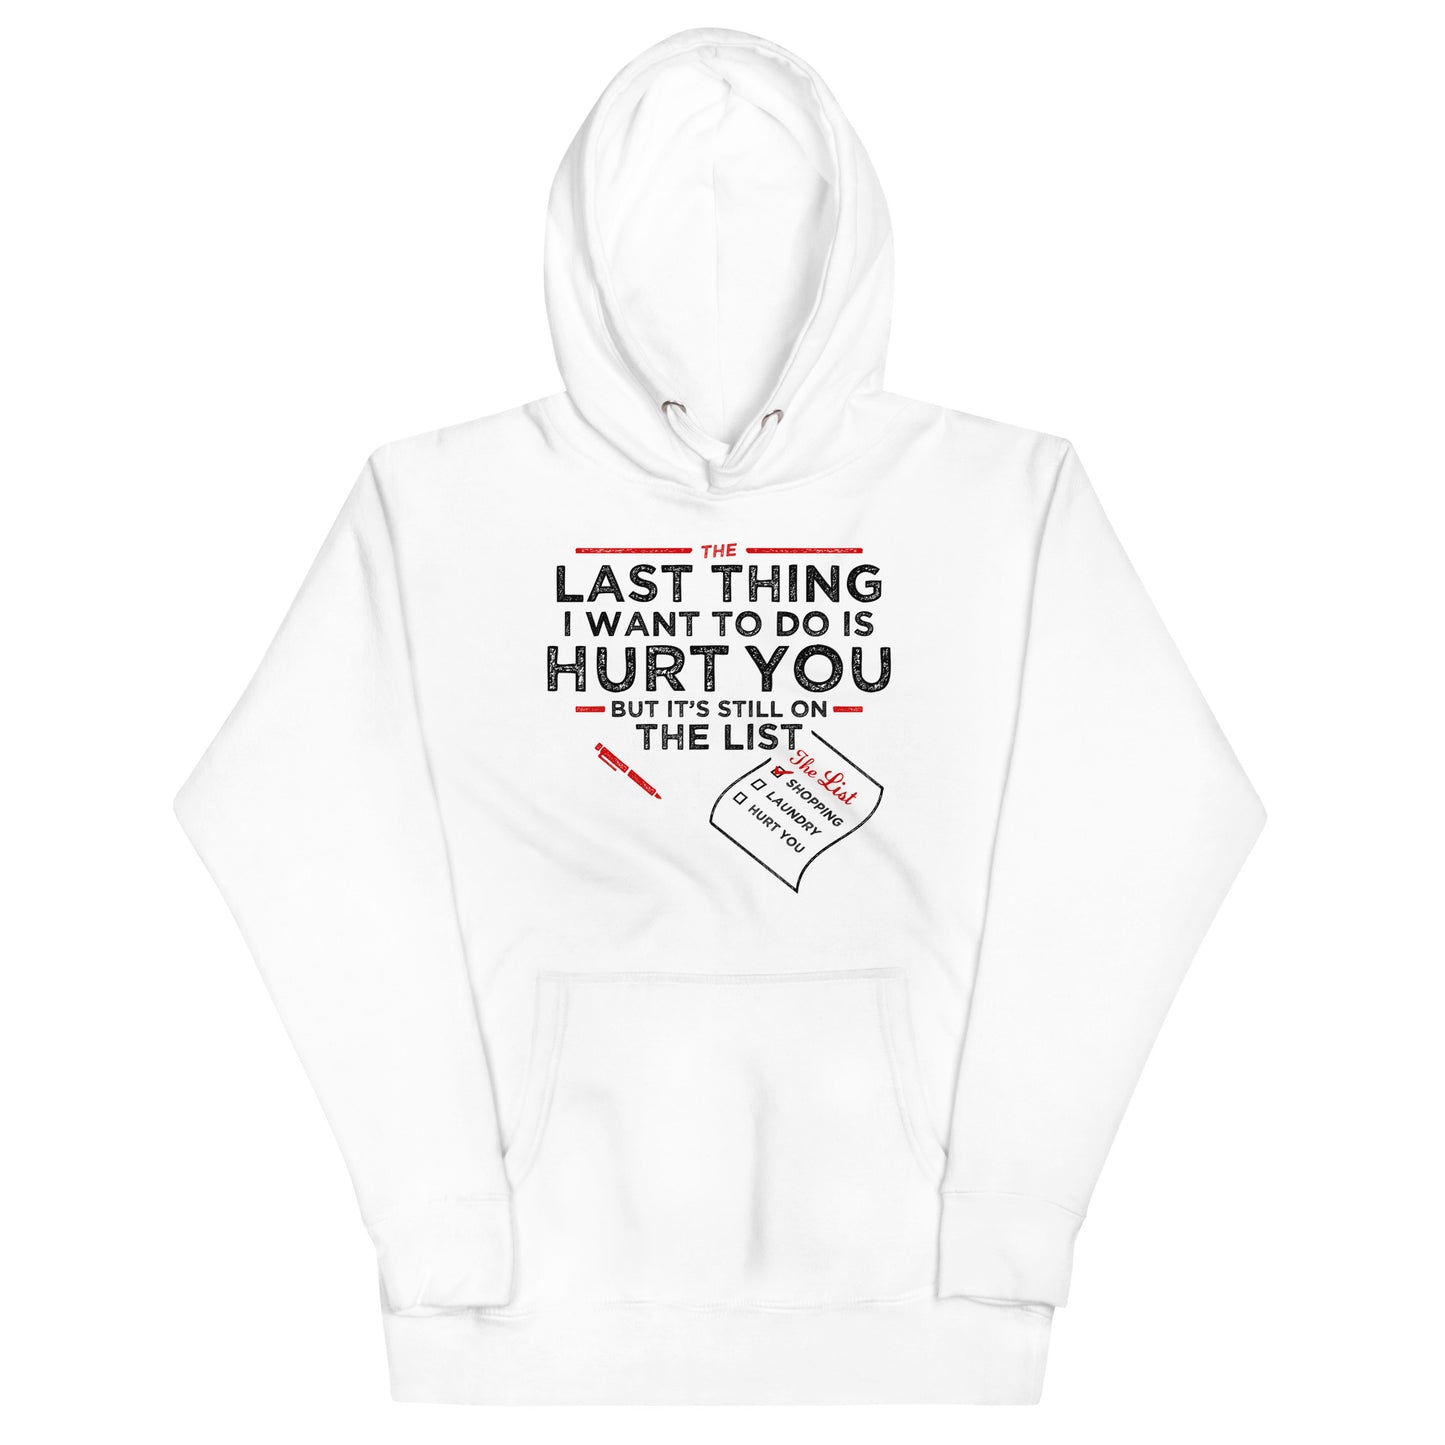 The Last Thing I Want To Do Is Hurt You Unisex Hoodie